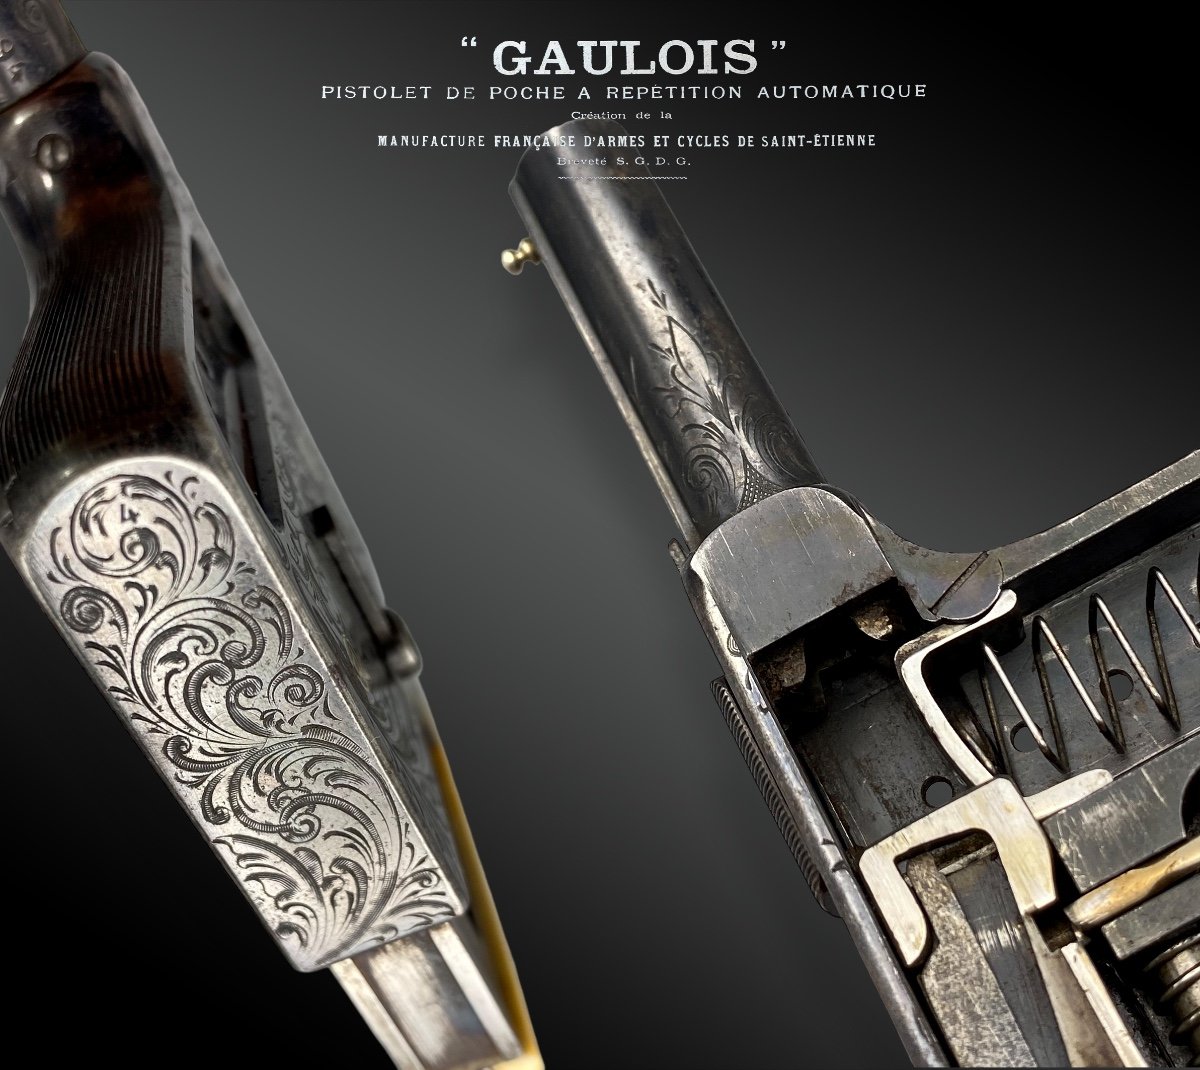 Automatic Repeater Pistol “gaul” No. 4, With Fauve Leather Case France 19th Century-photo-3